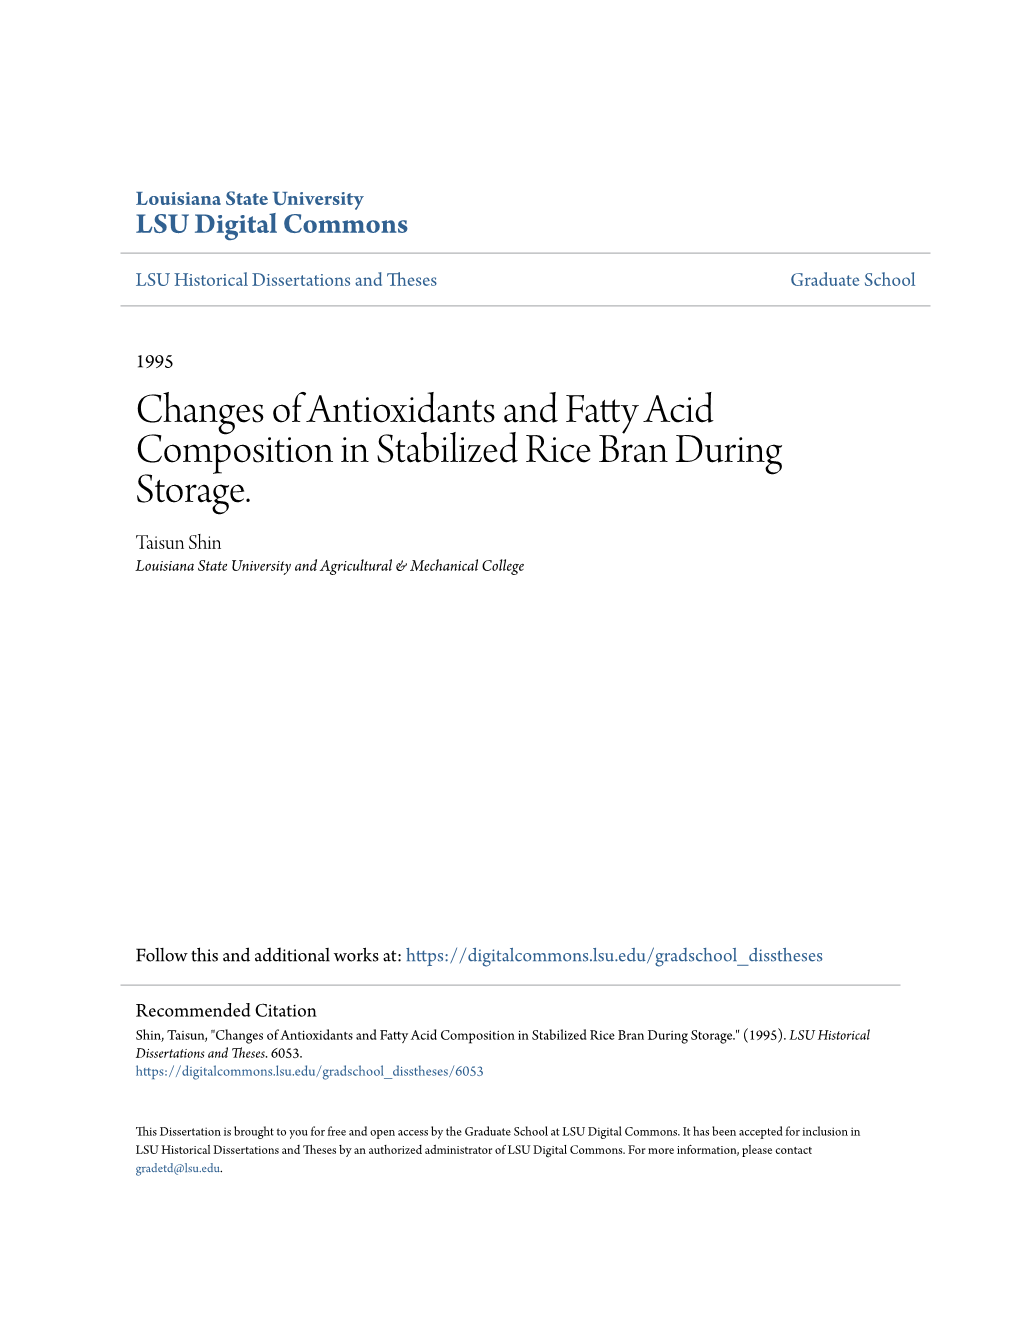 Changes of Antioxidants and Fatty Acid Composition in Stabilized Rice Bran During Storage